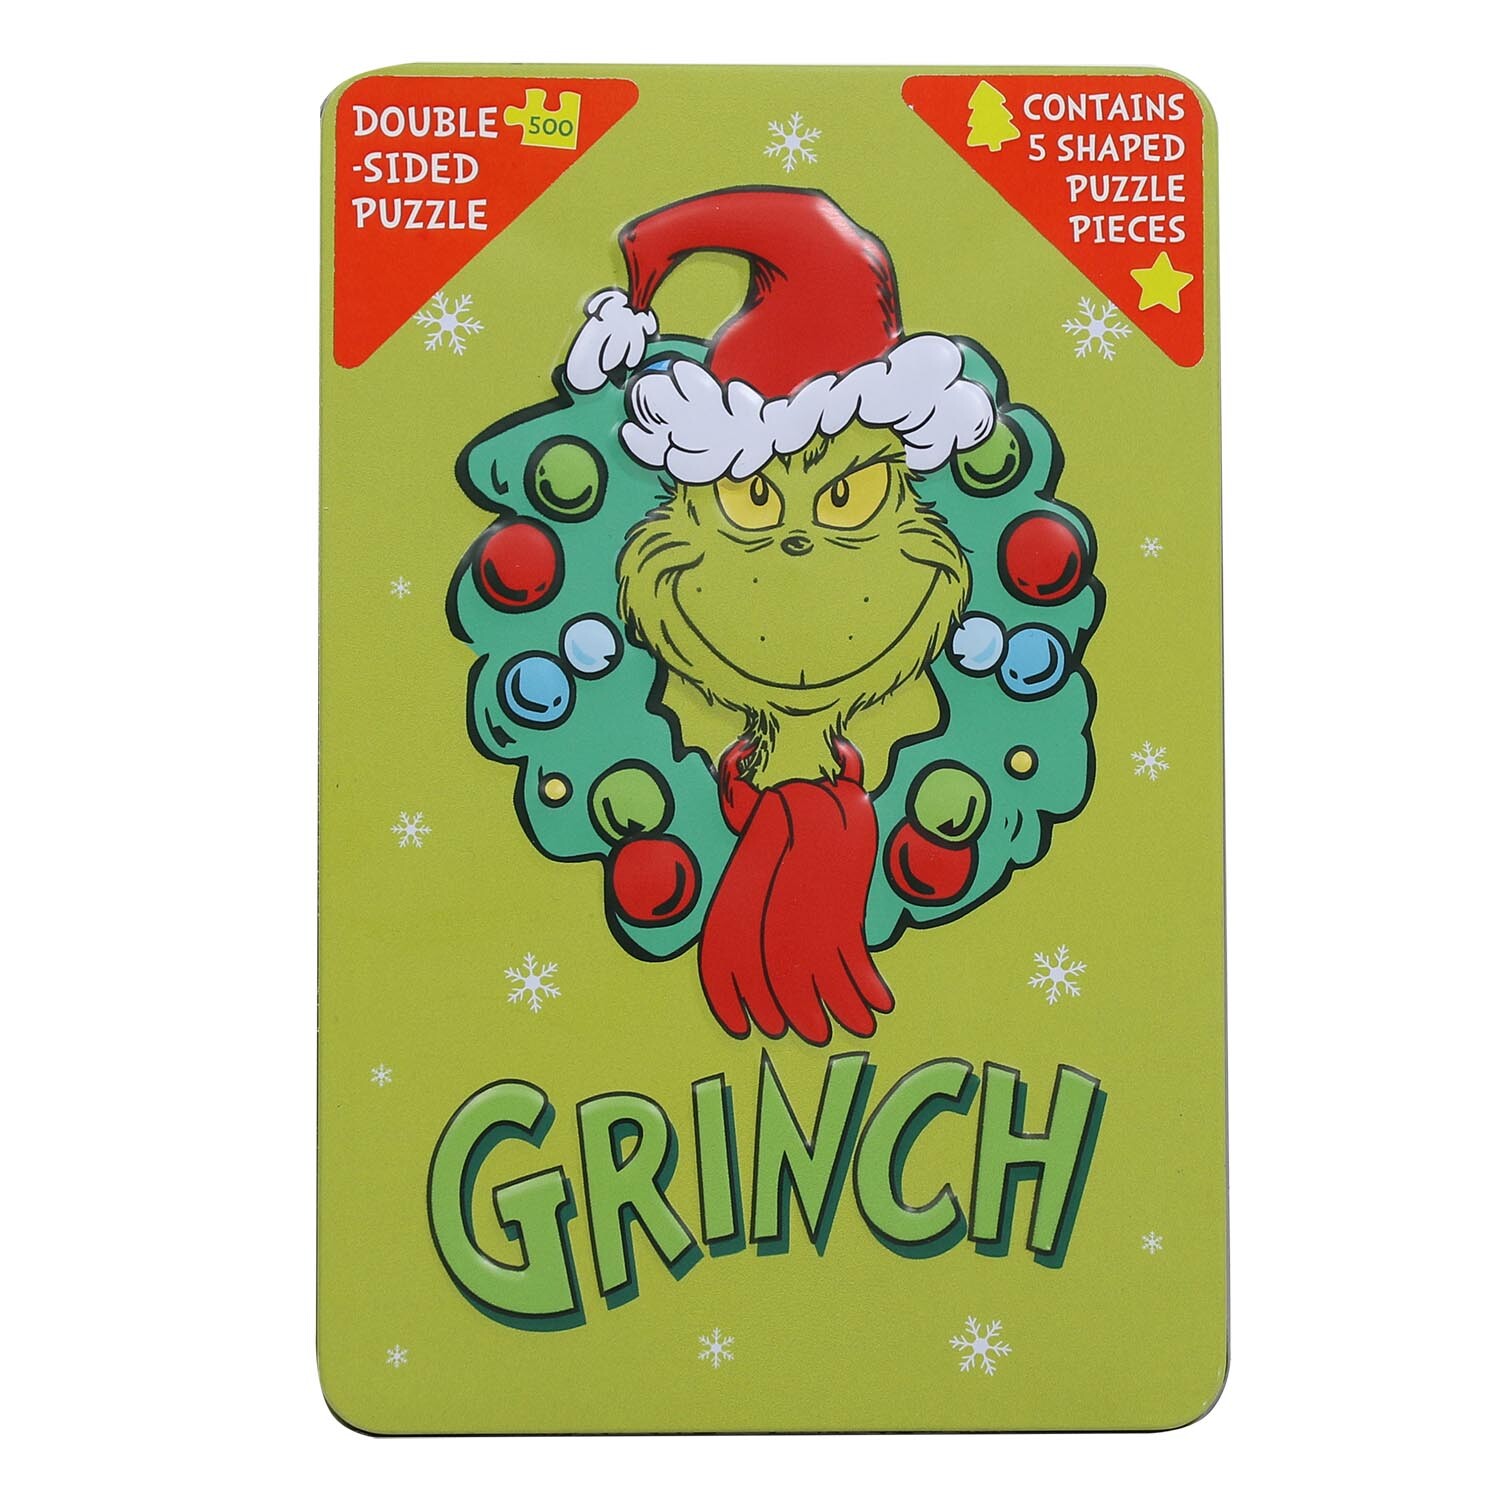 G&G The Grinch Double Sided Puzzle 500 Piece Image